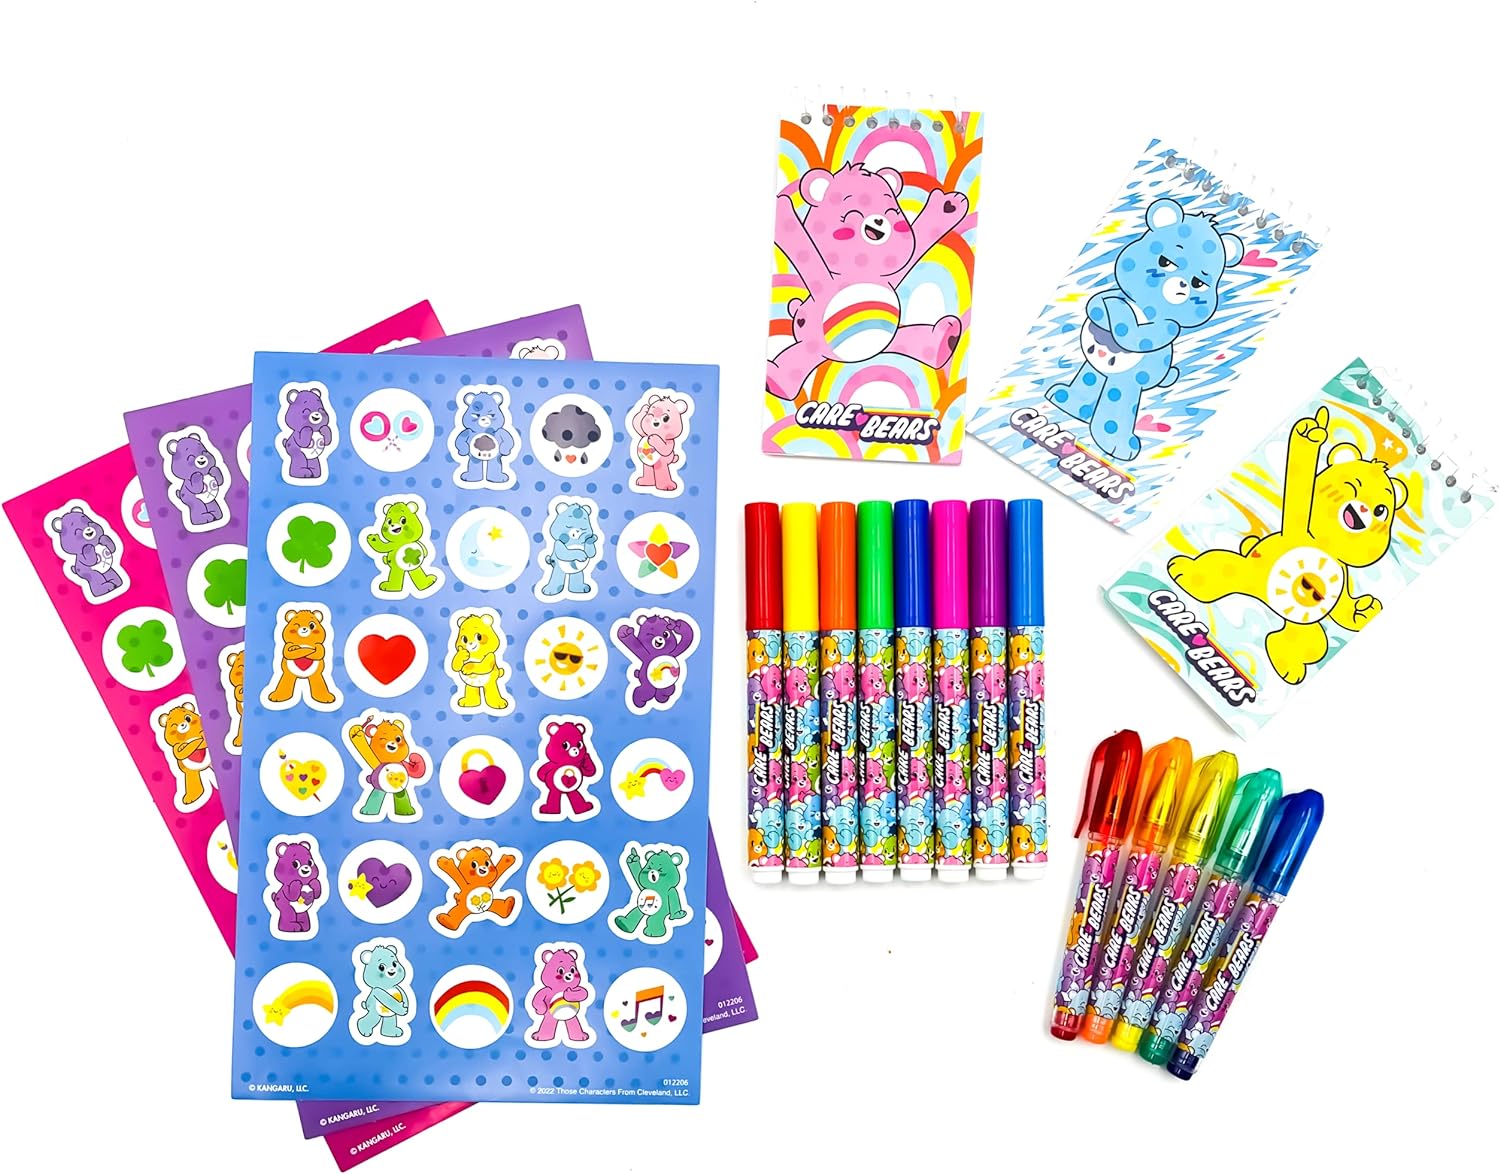 Scenticorns Care Bears Mini Fun Kit - Fruity Scented Sheets, Super Tip Markers - Take Care Bears on The go for Travel and Creative Play for Kids Playtime